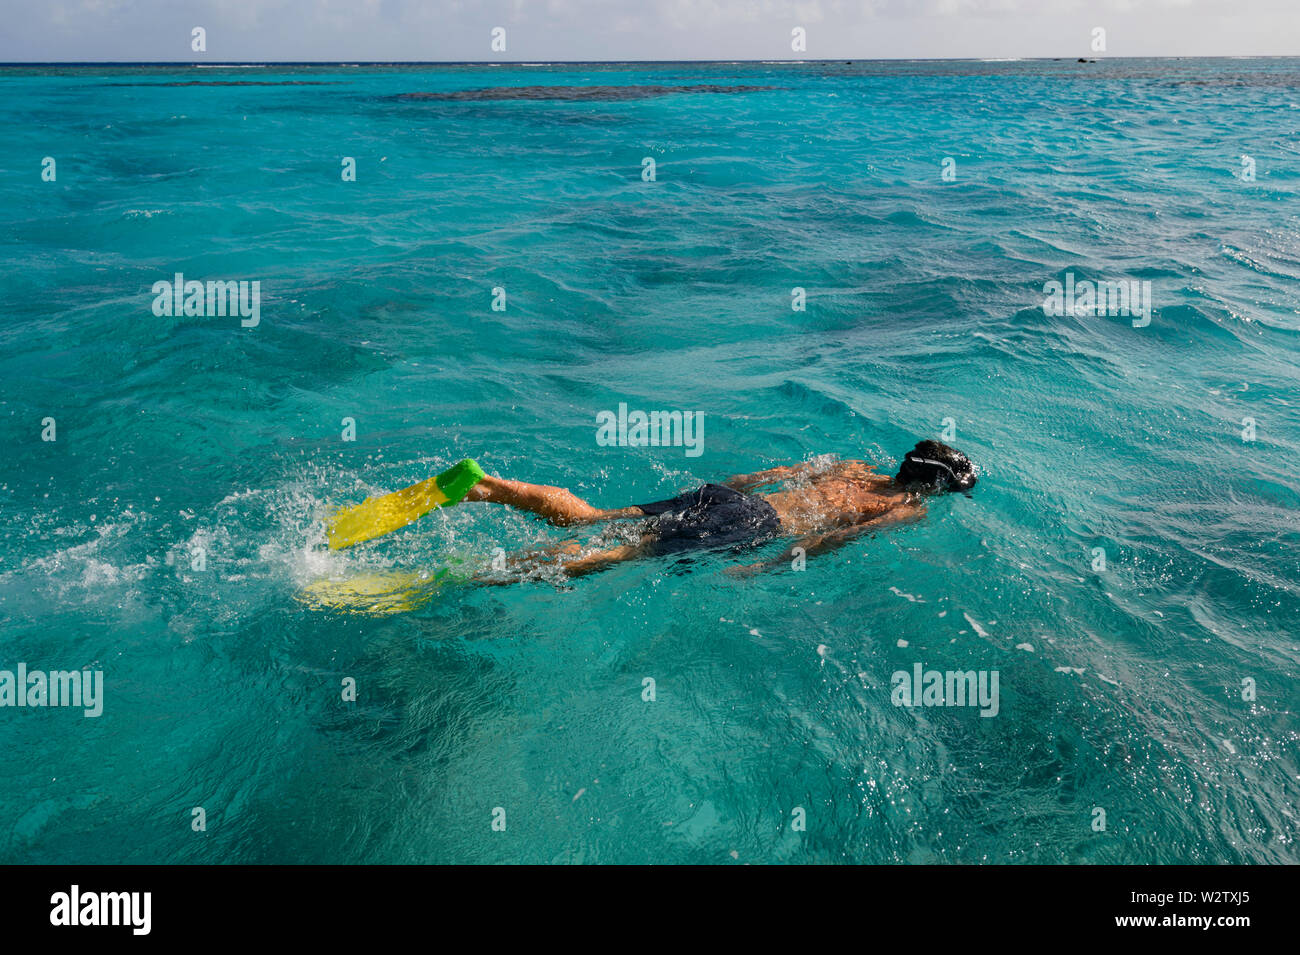 Persons with yellow flippers snorkelling in the turquoise lagoon of Aitutaki, Cook Islands, Polynesia Stock Photo